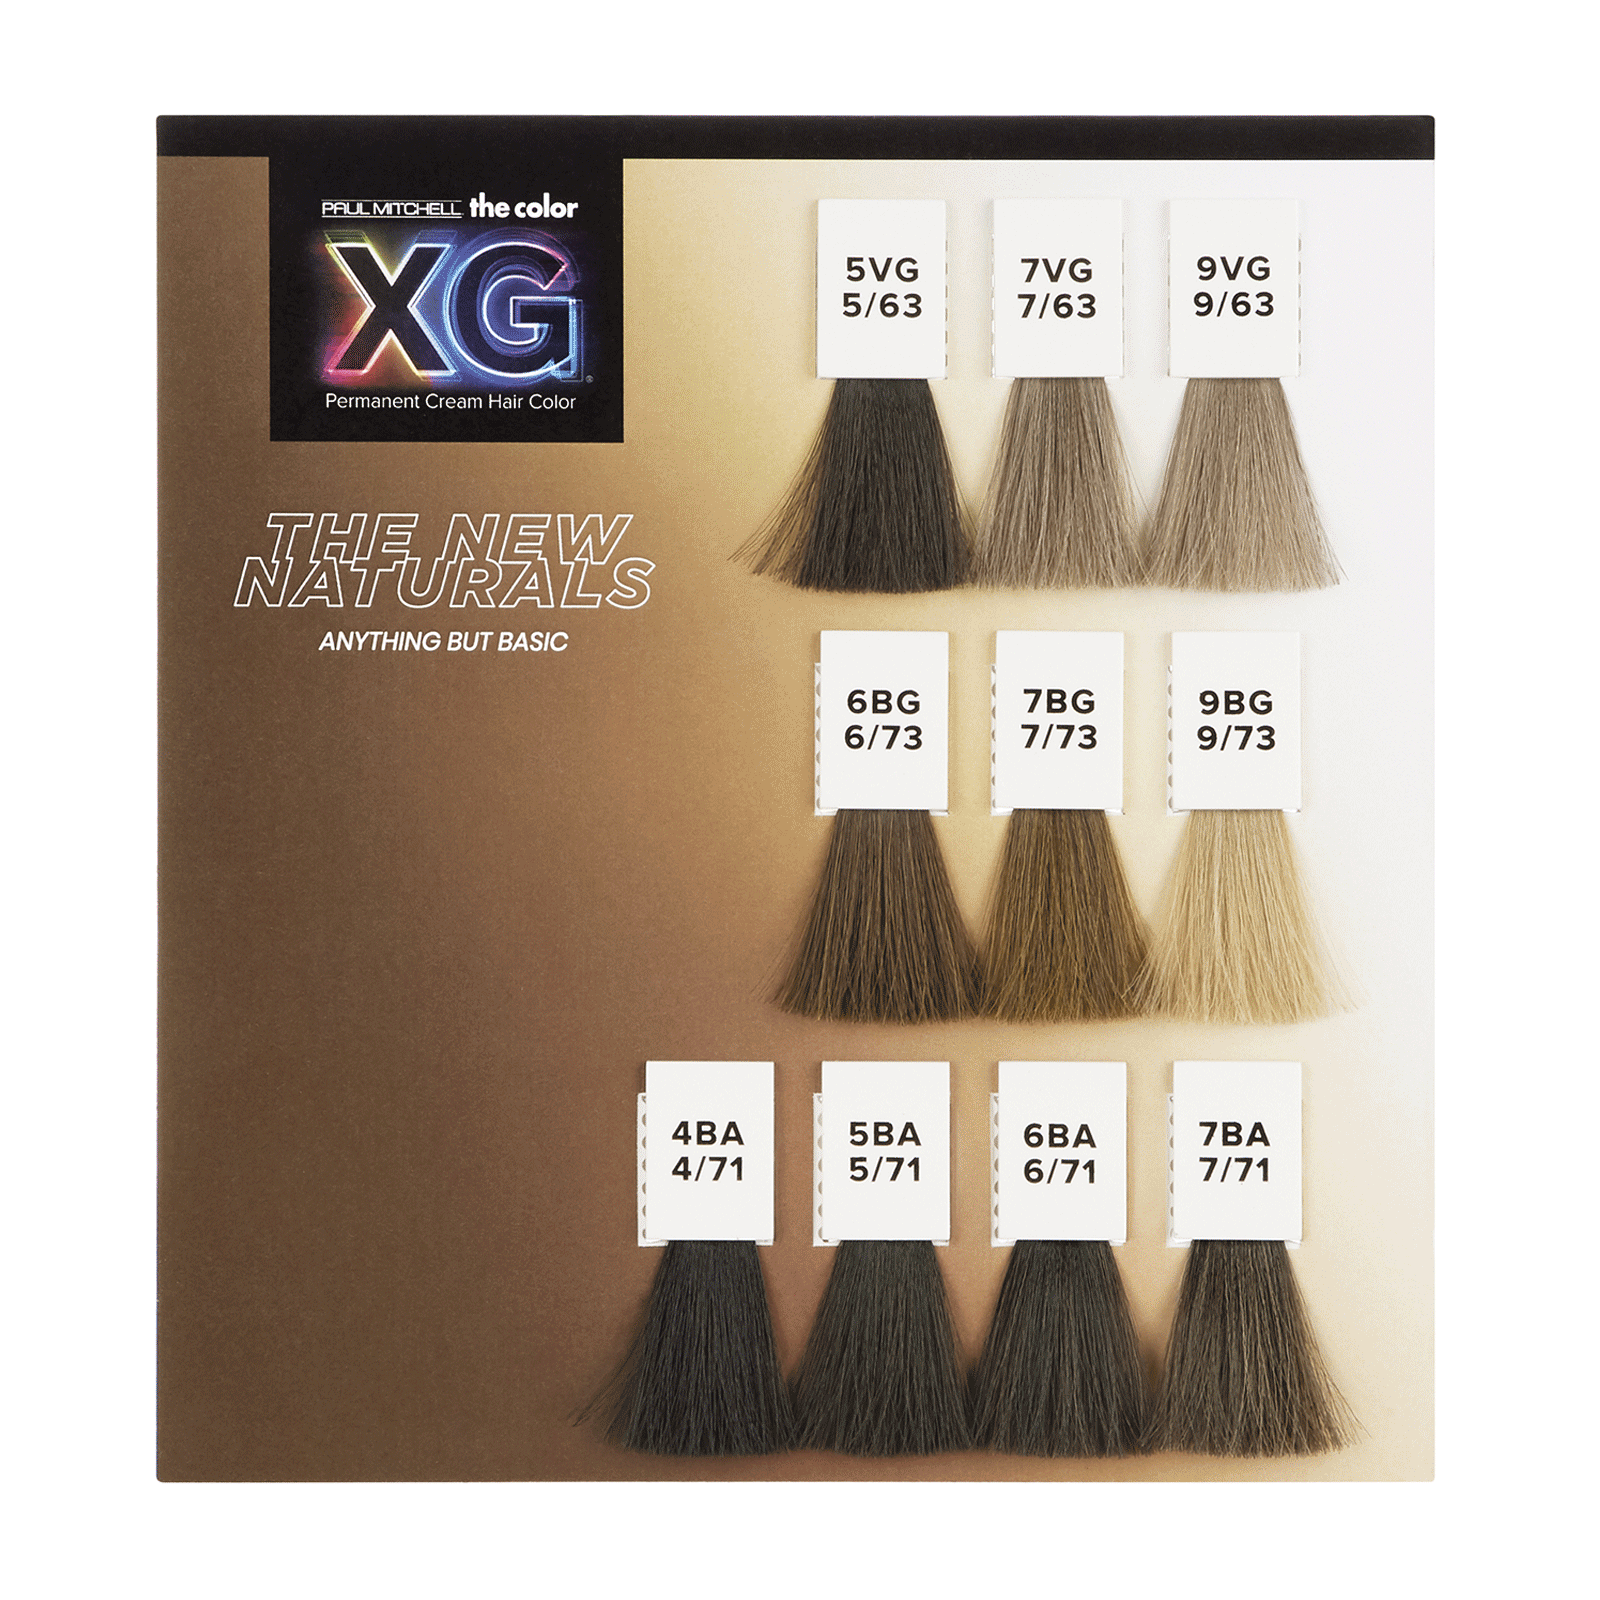 Paul Mitchell The Color Xg Color Chart